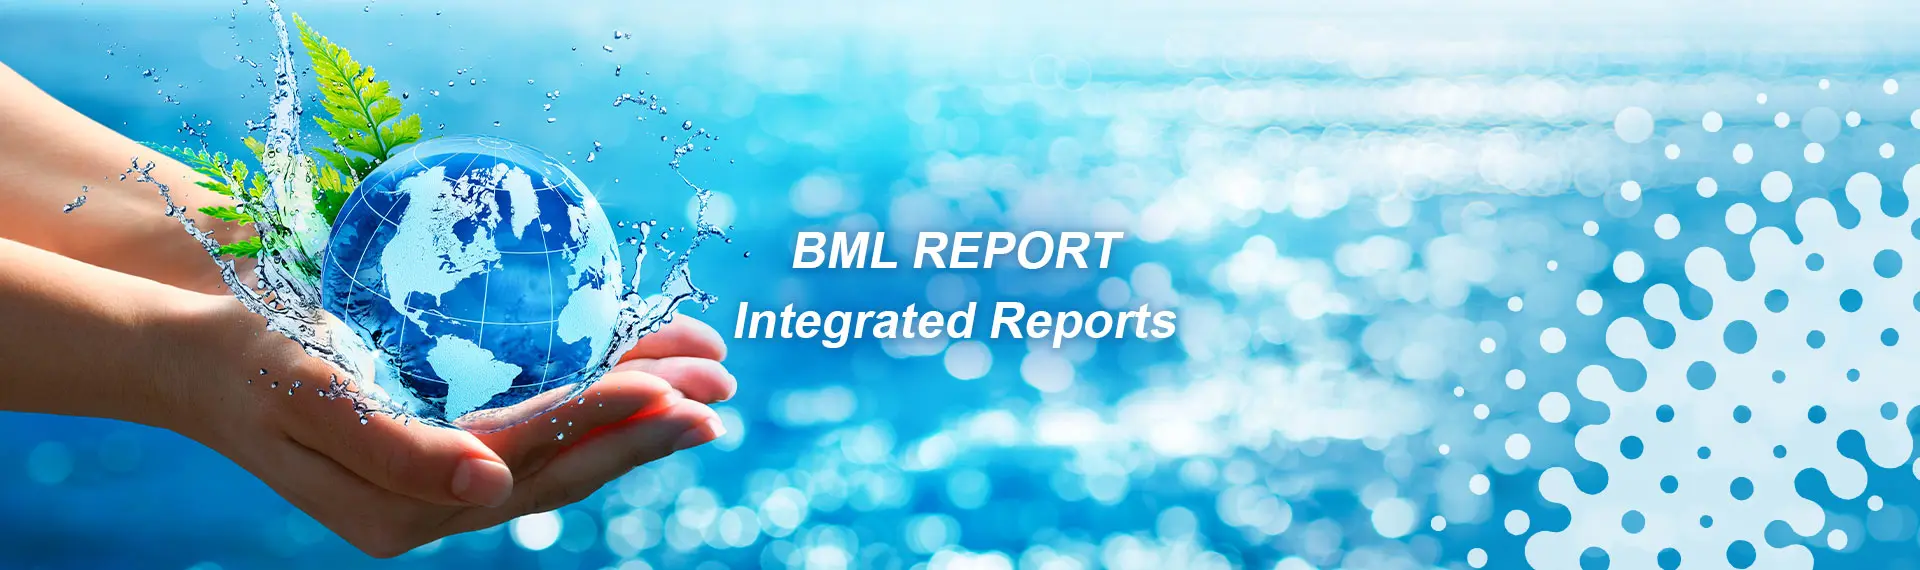 BML REPORT.Integrated Reports.